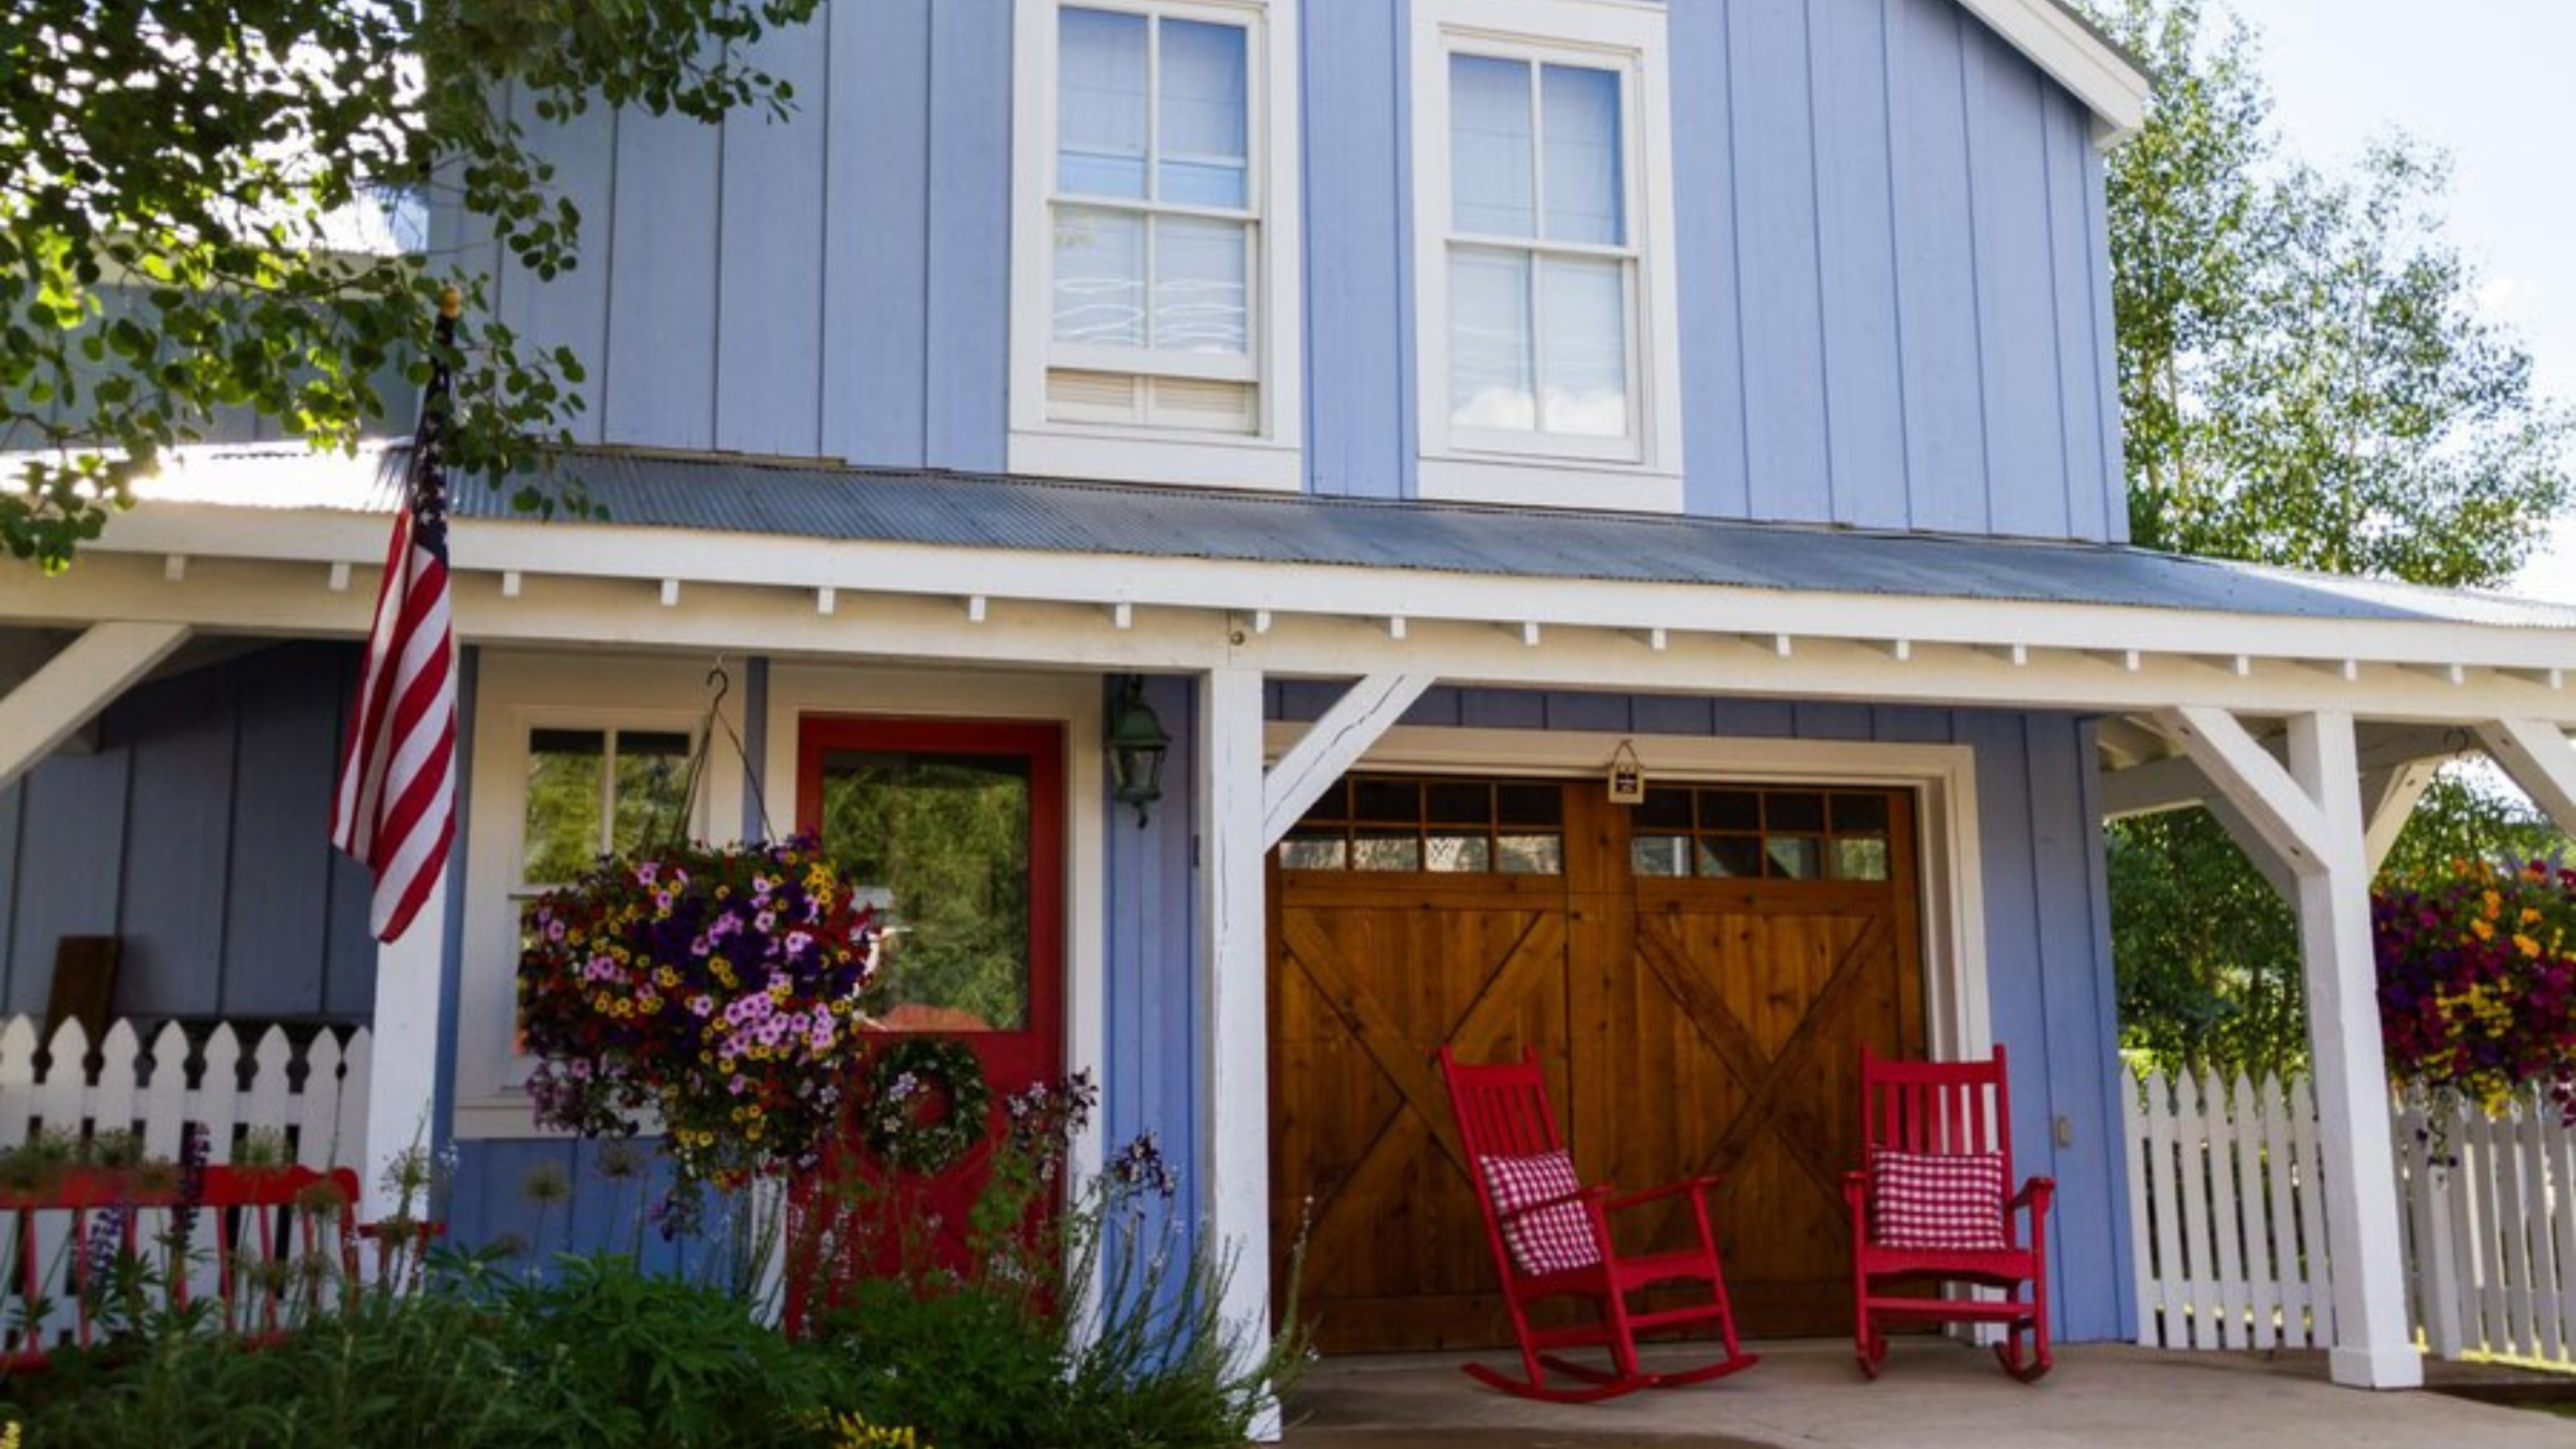 5 Important Aspects to Renovate Your Home’s Exterior